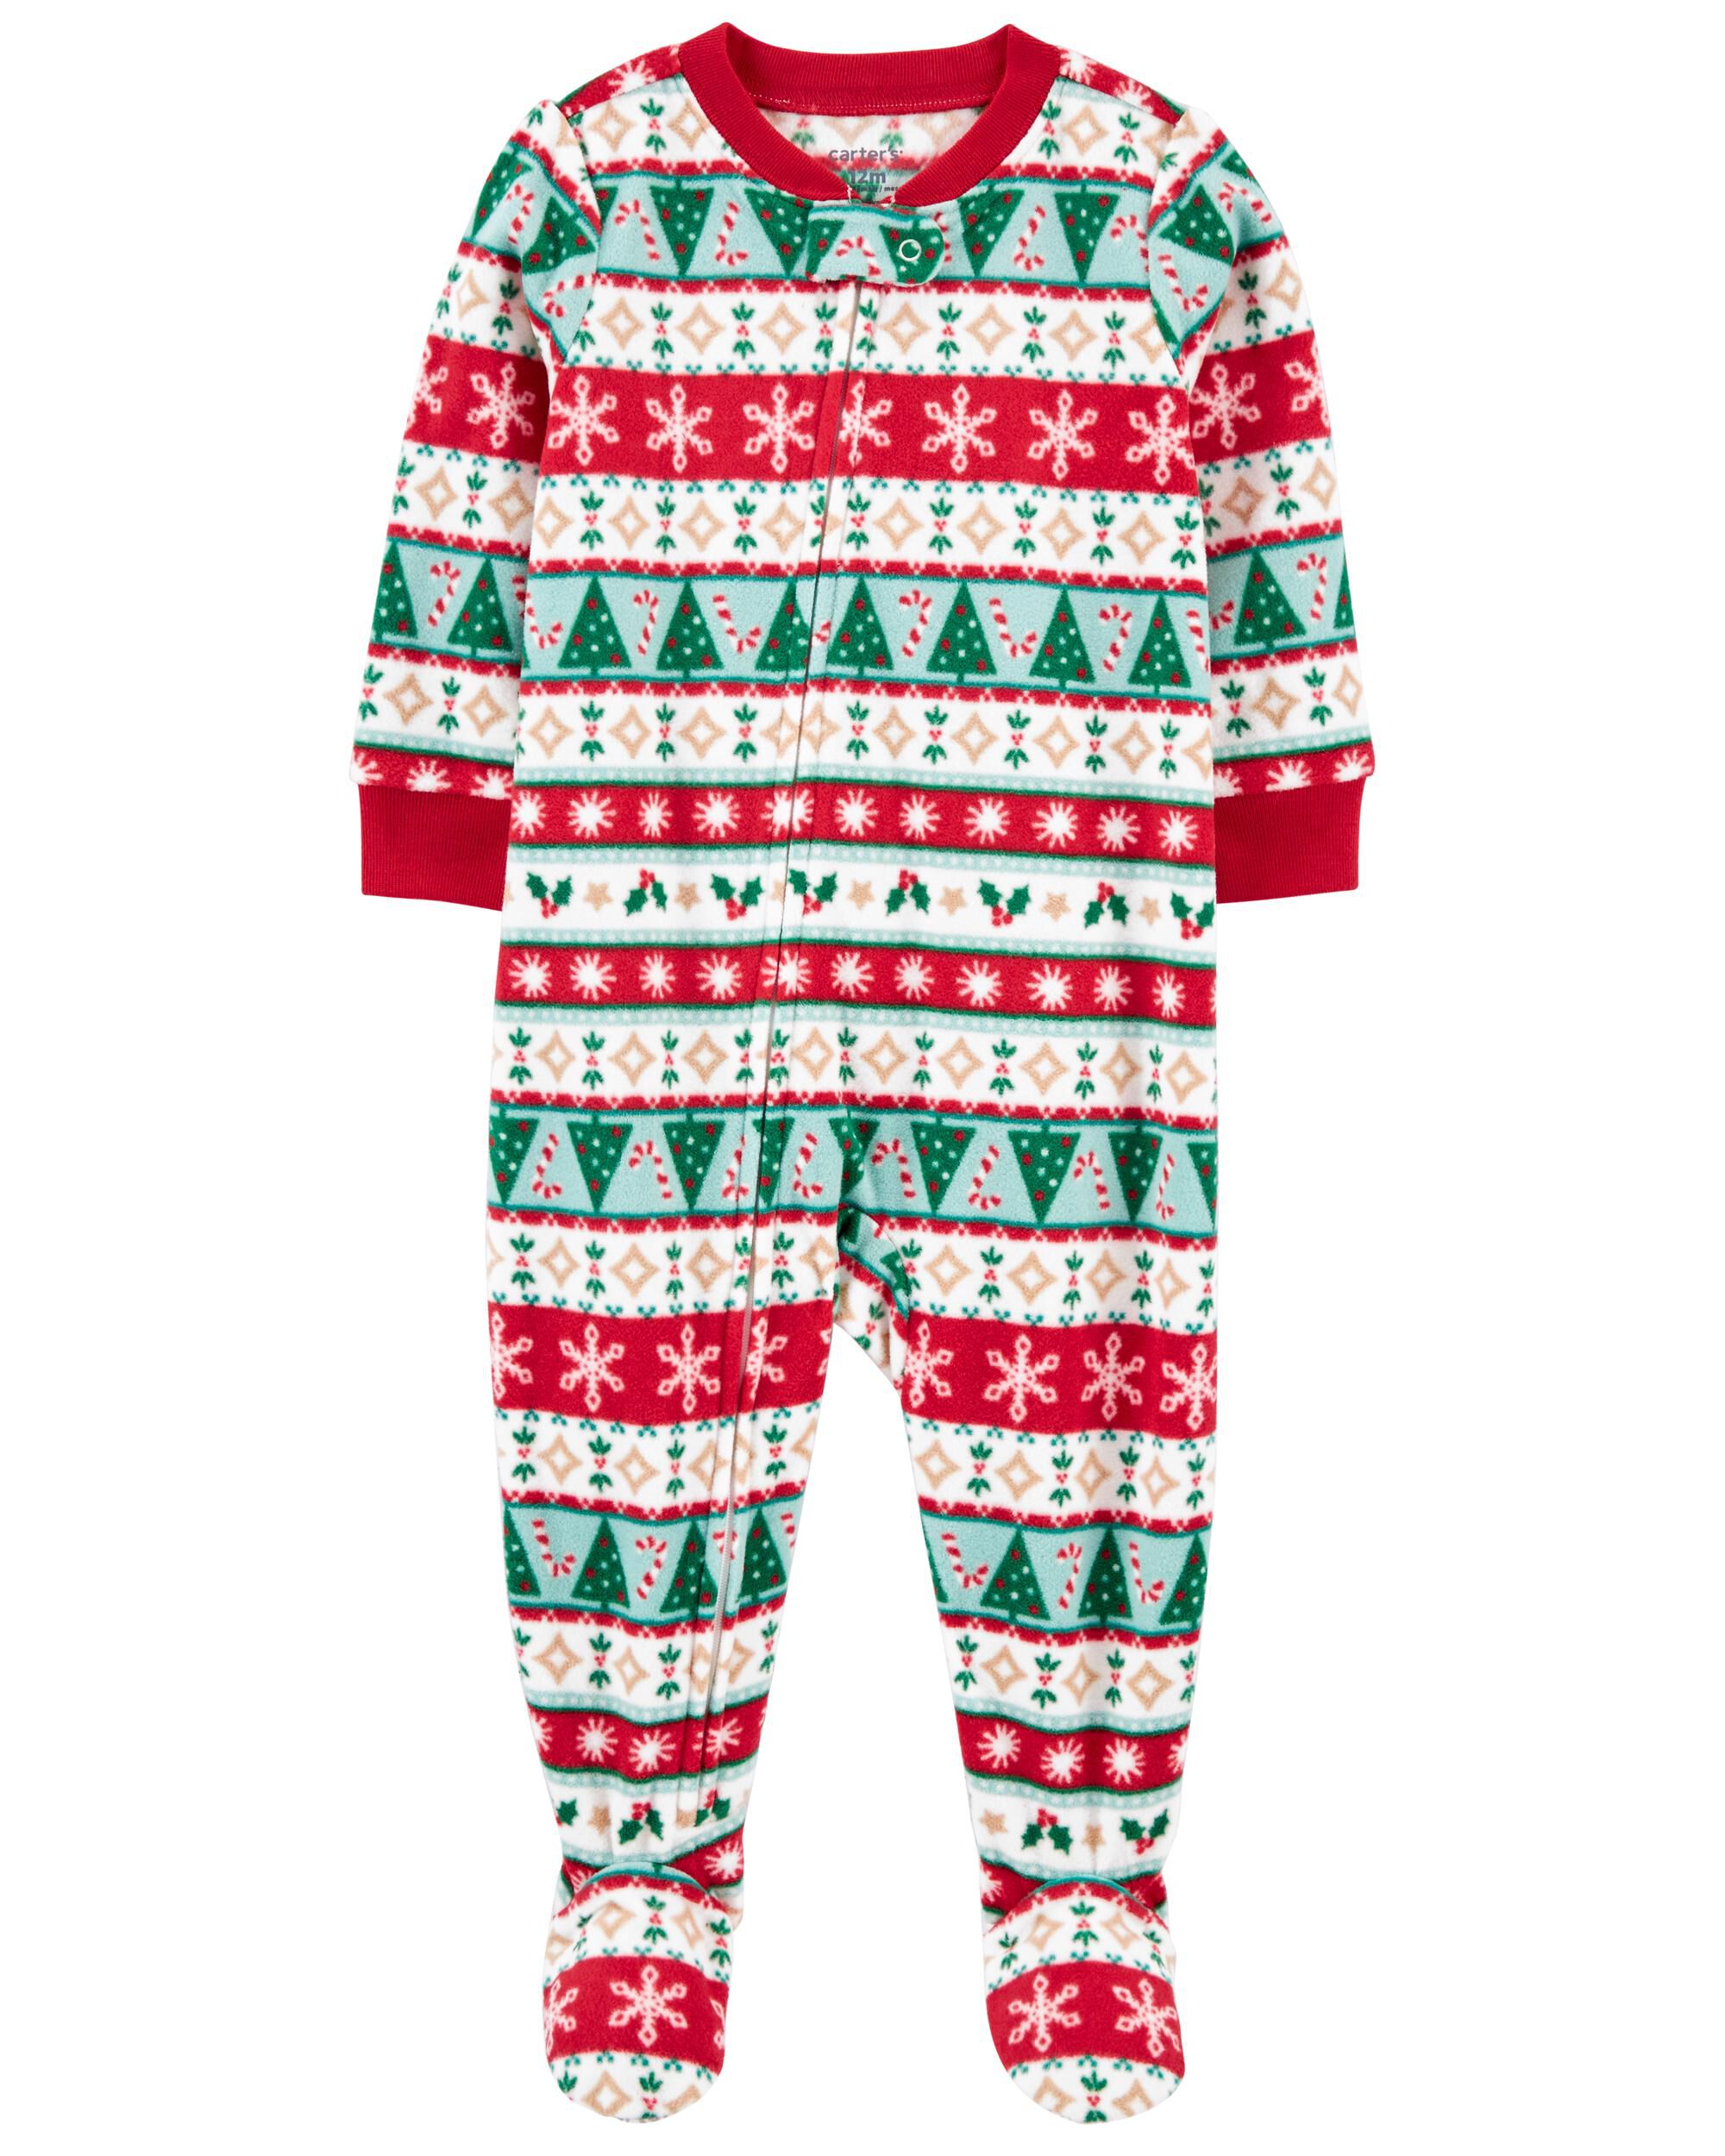 NEW Carter's 2 Piece PJs Girl Boy Holiday Red White Pajamas 2 3 4 5 6 7 8 12 14 